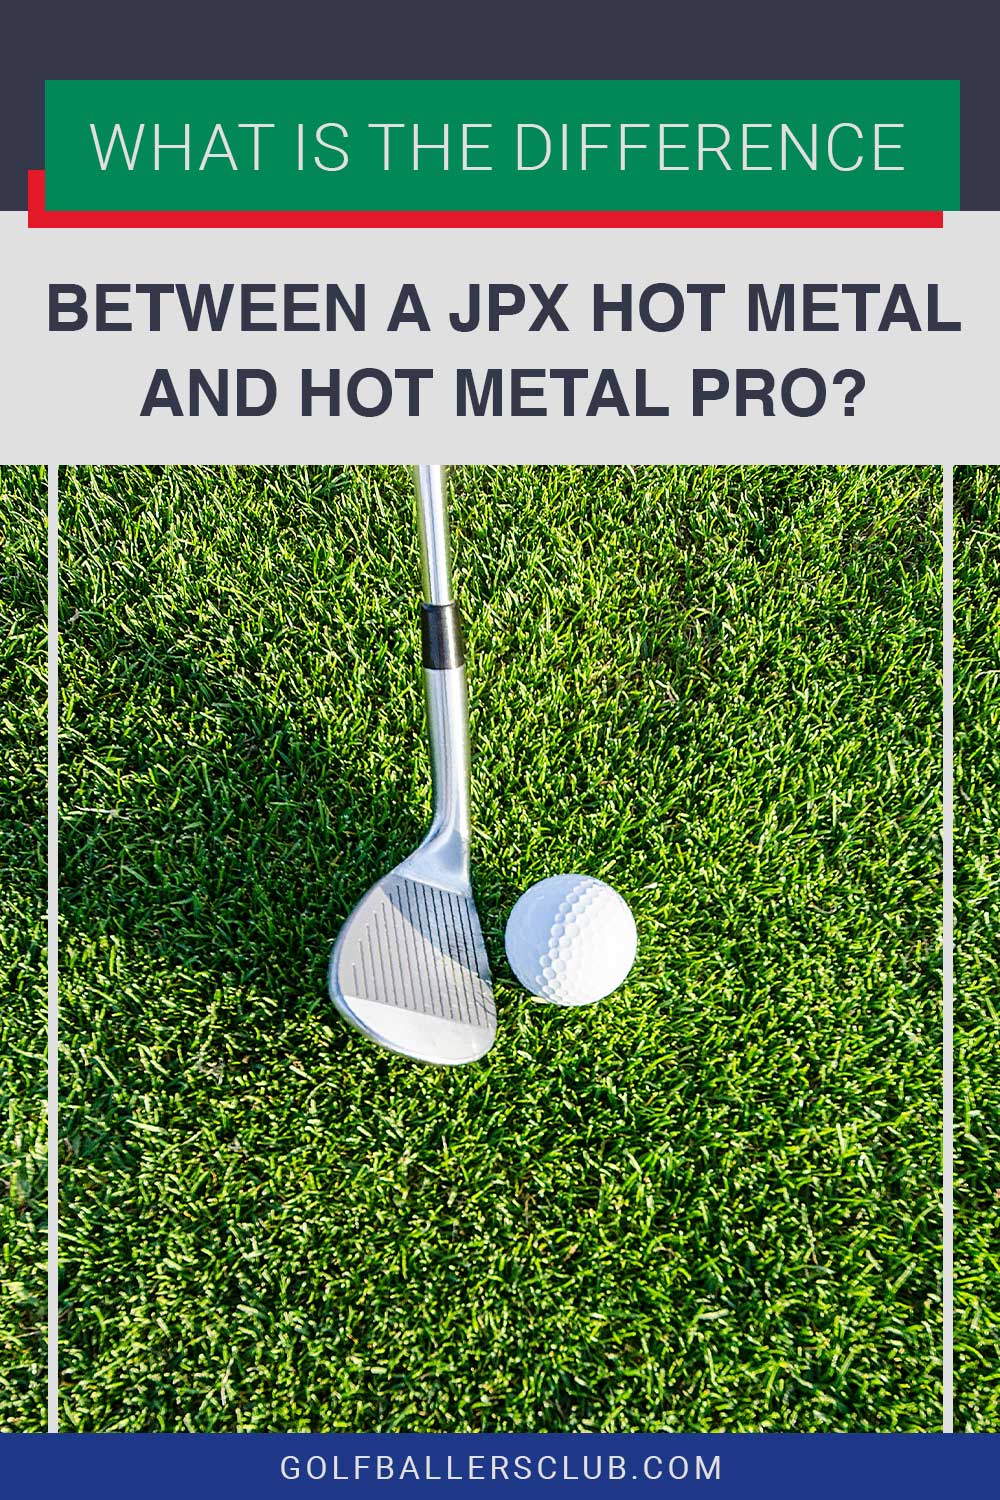 A golf iron almost touching a golf ball on grass - What Is the Difference Between a JPX Hot Metal and Hot Metal Pro?